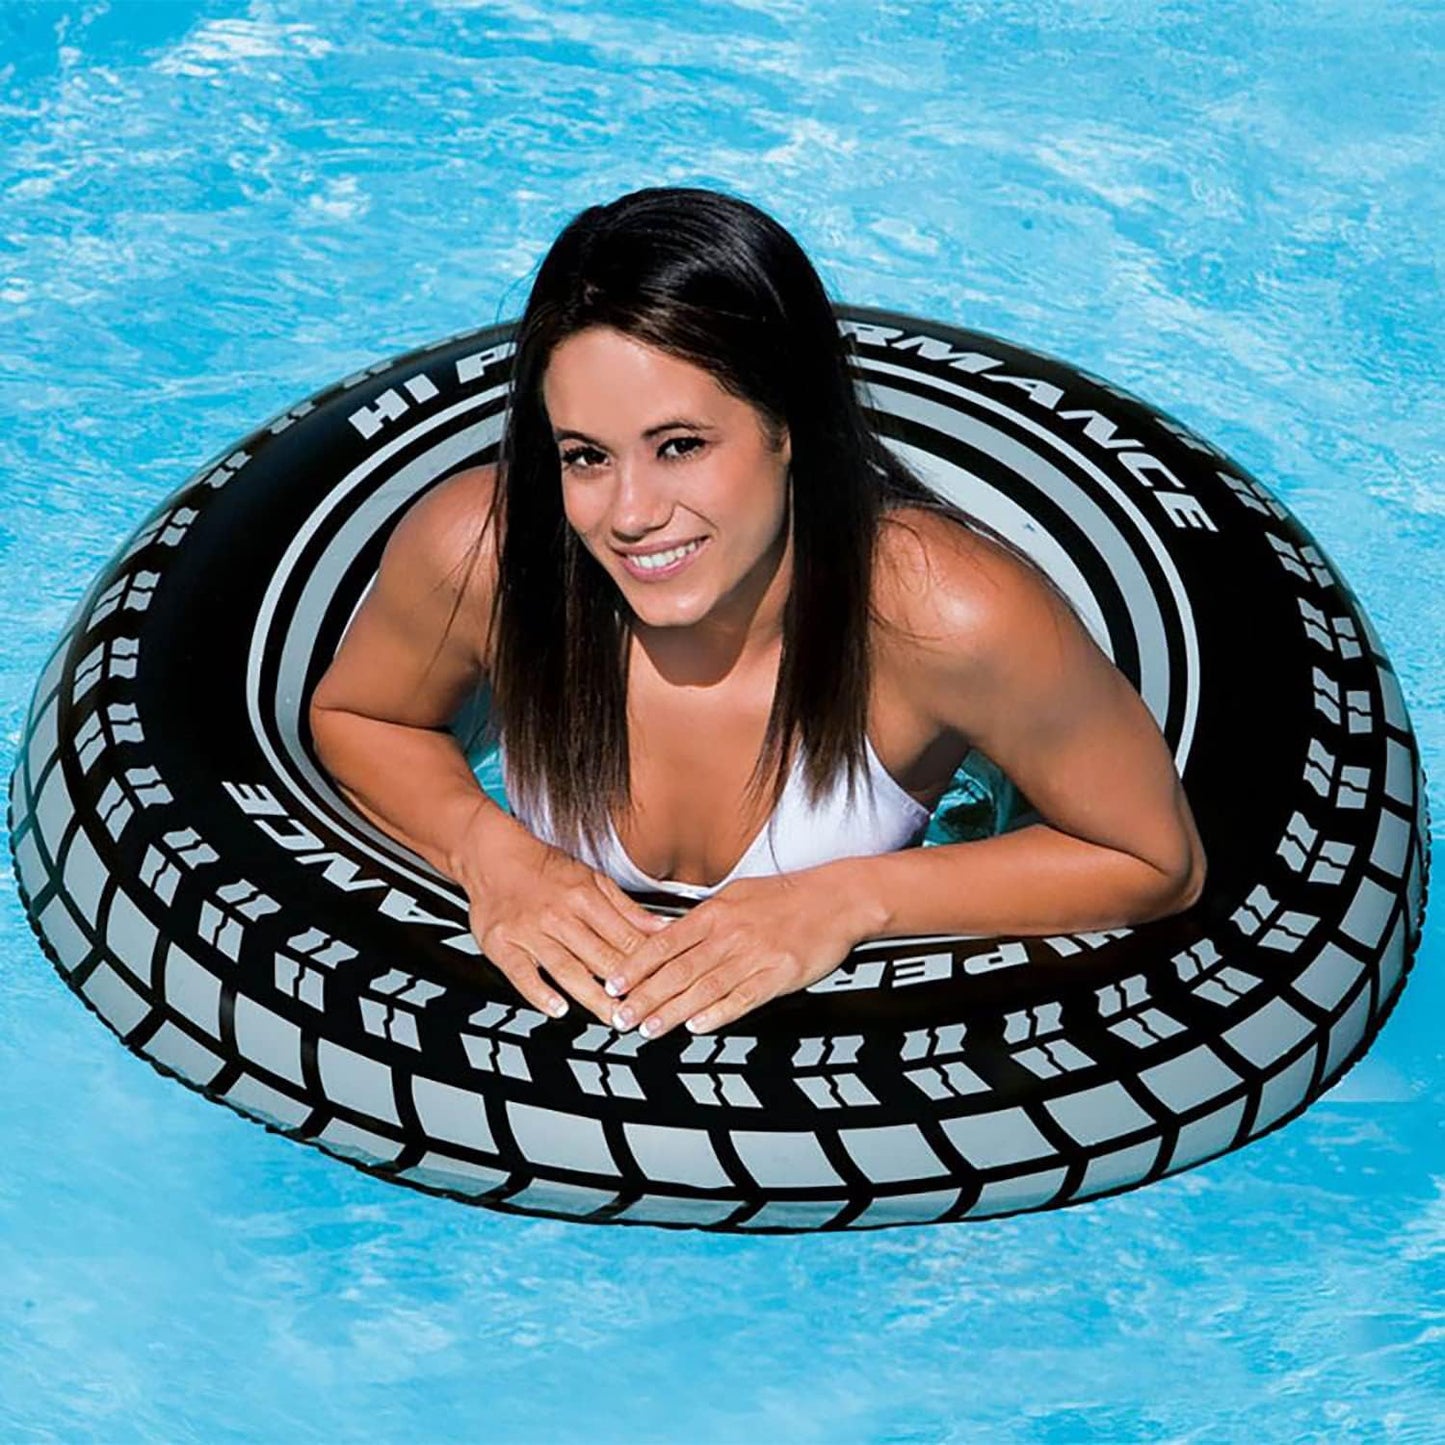 Inflatable 36" Giant Tire Tubes for Swimming Pool/Lake/Ocean (2 Pack)